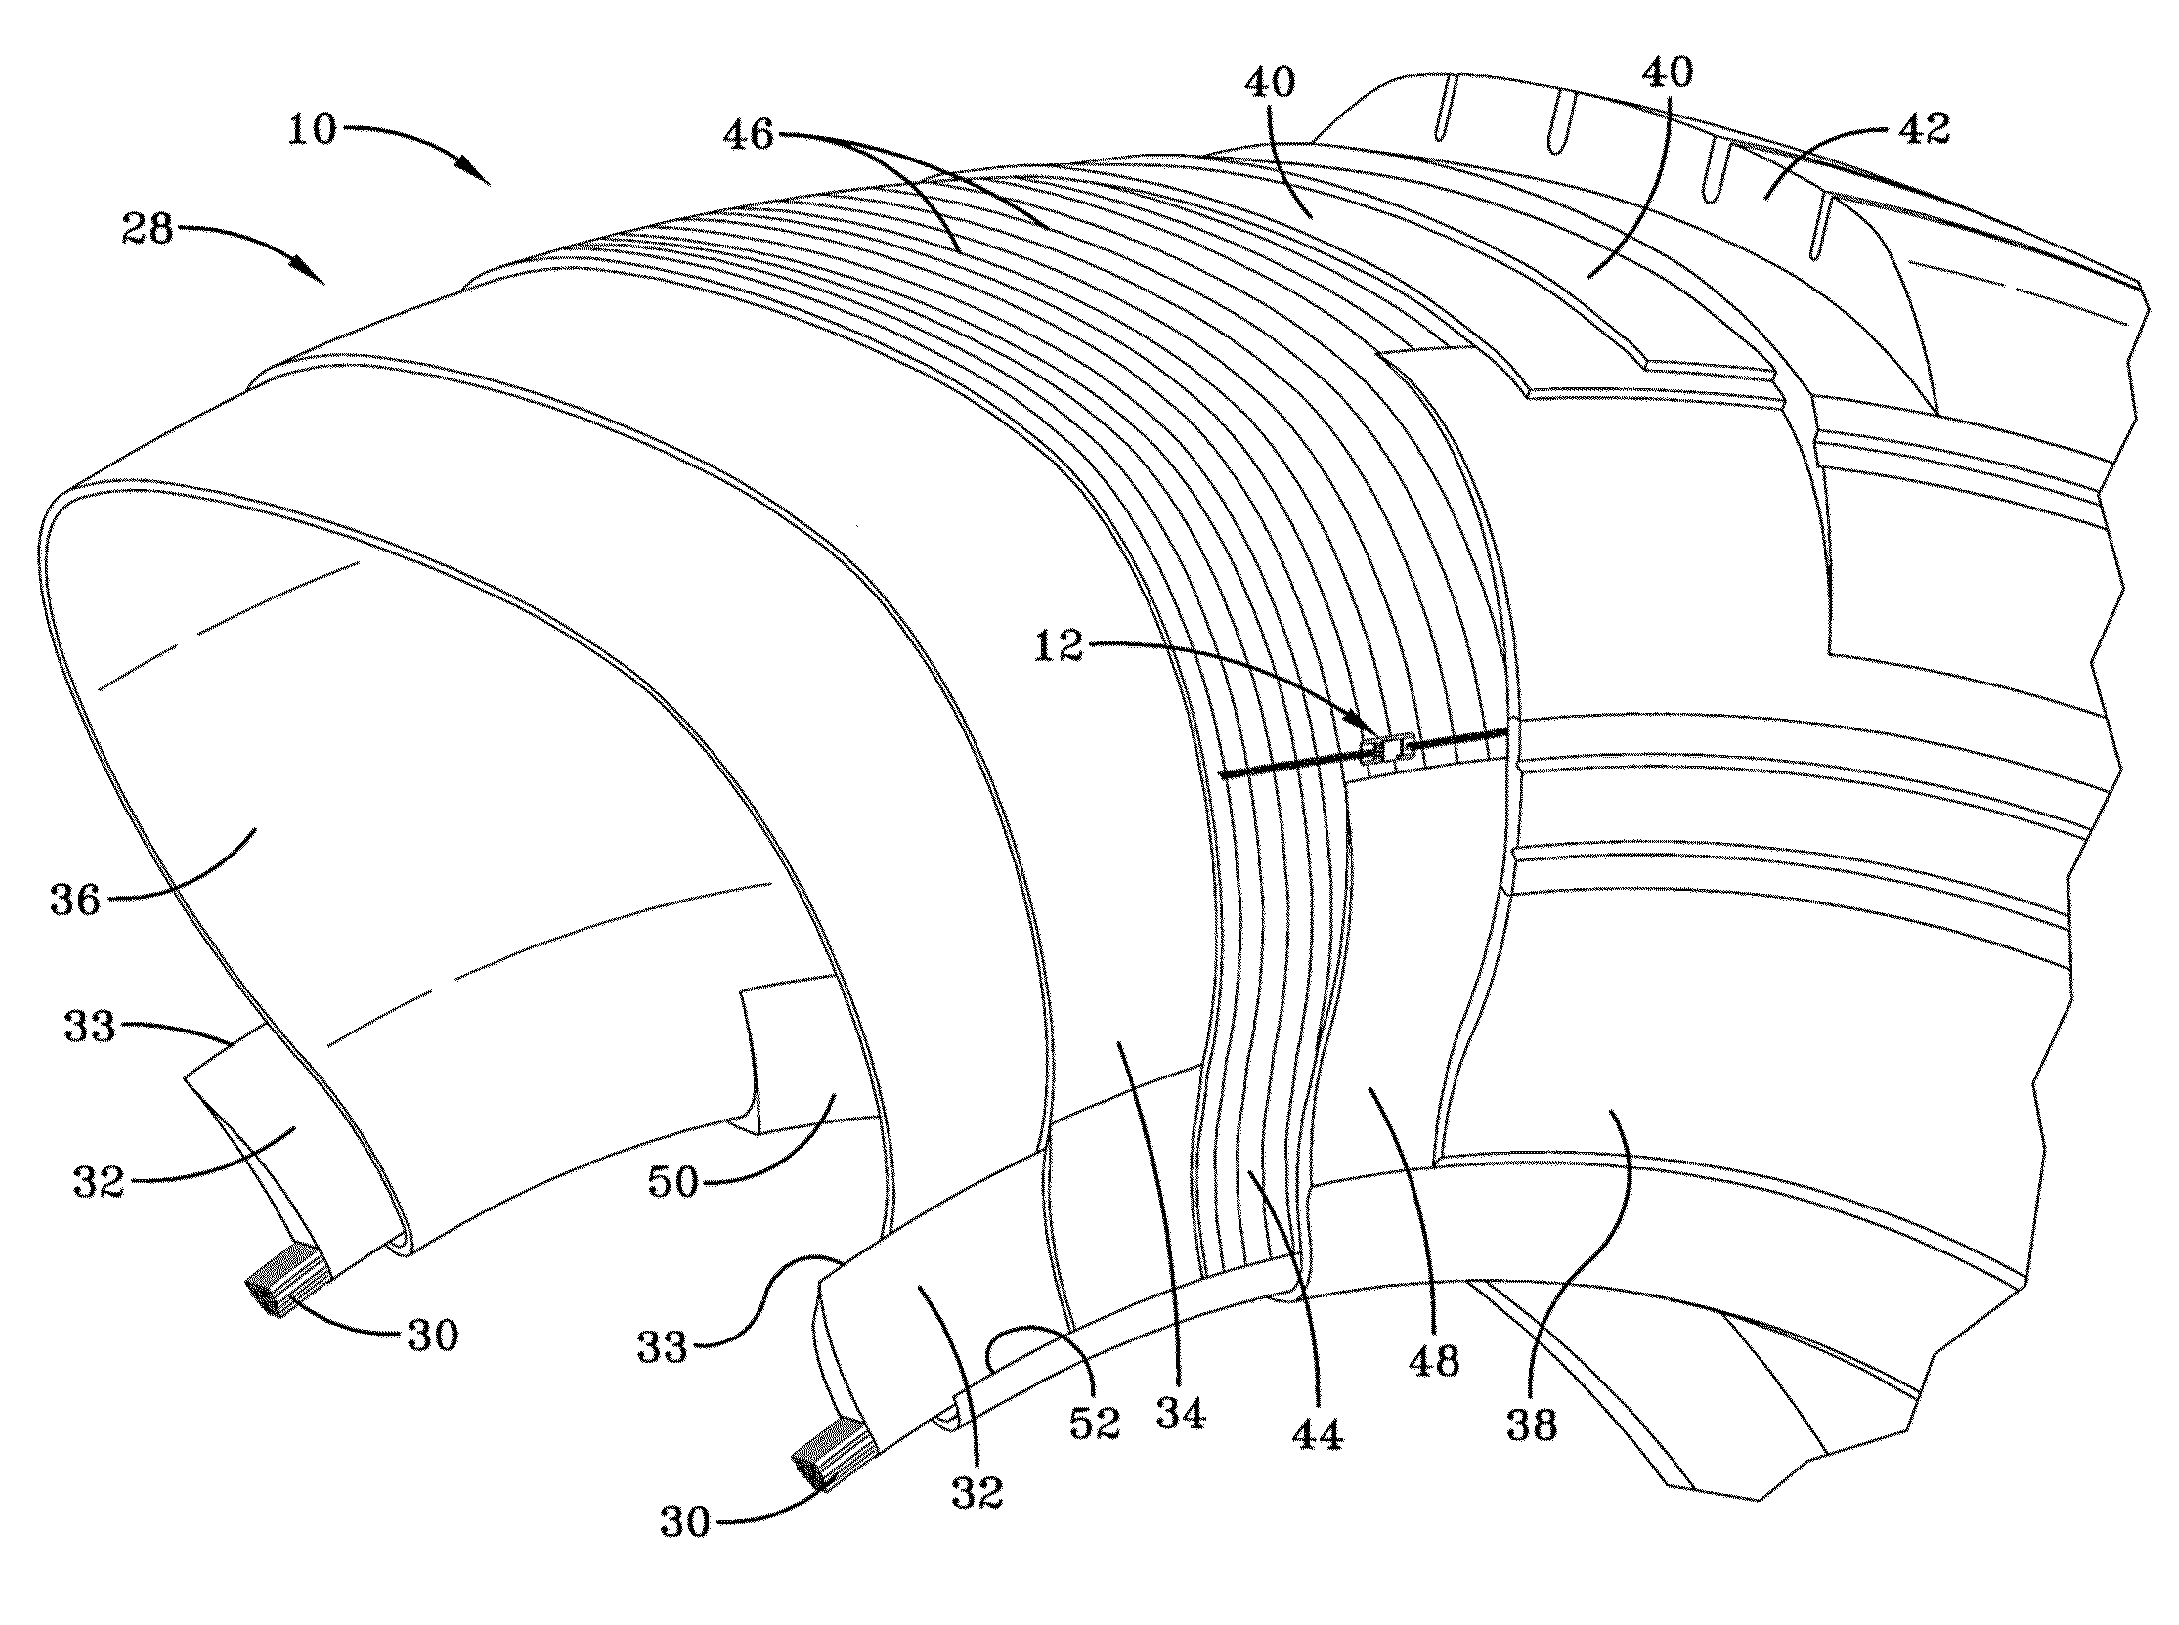 Tire and electronic device assembly